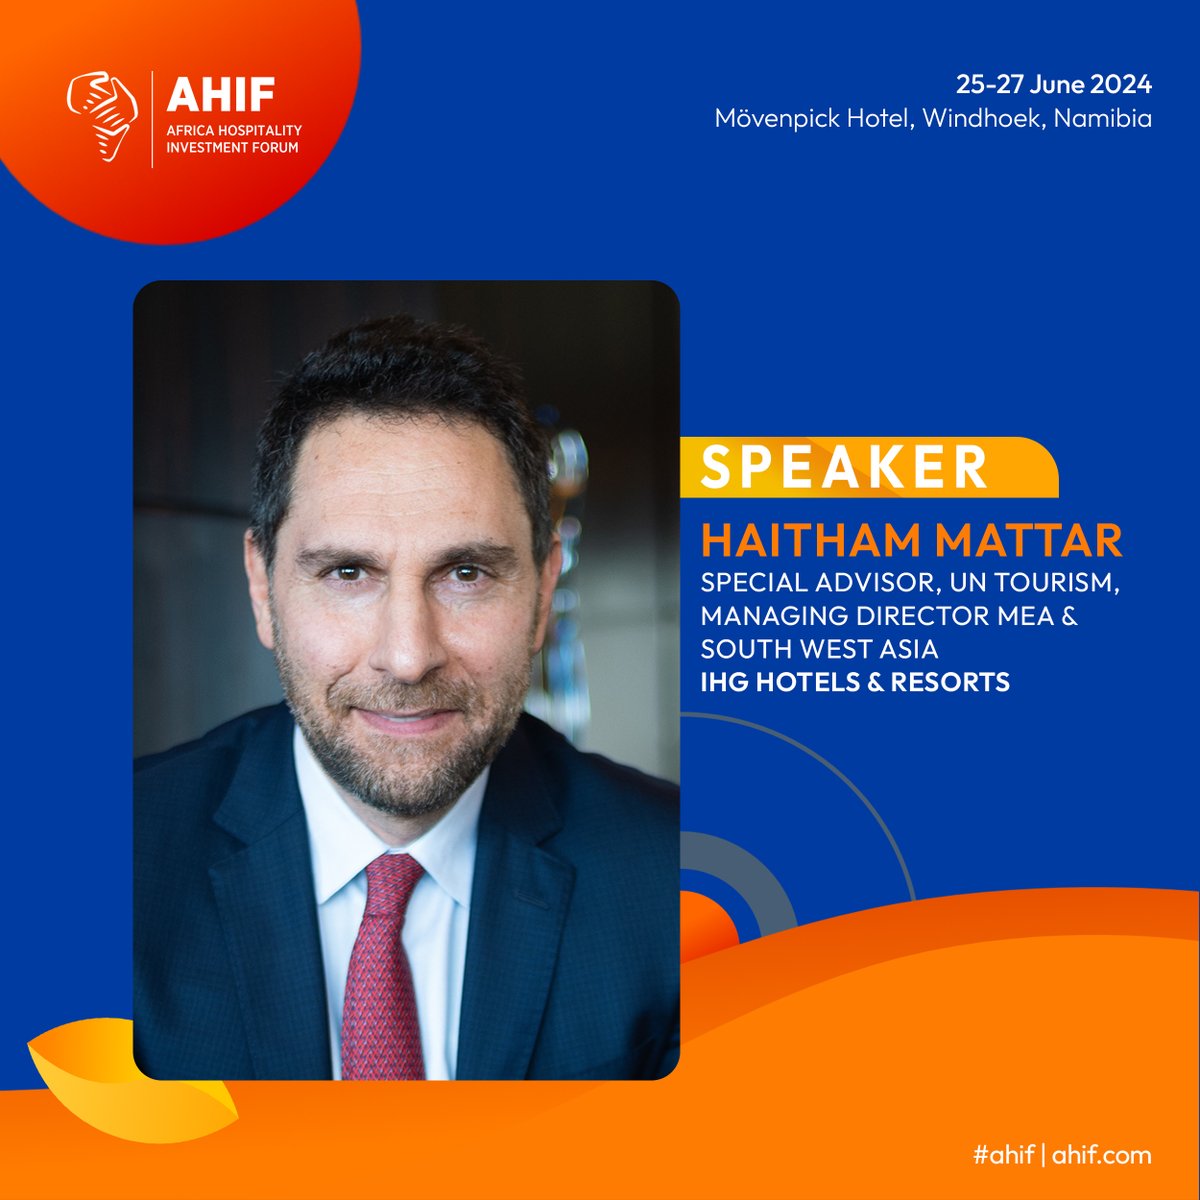 Joining us at AHIF is hospitality visionary Haitham Mattar, Managing Director for IHG in the Middle East, Africa & South West Asia. Don't miss Haitham's insights on the future of hospitality, and emerging trends shaping Africa's travel landscape! hubs.la/Q02s3XKX0